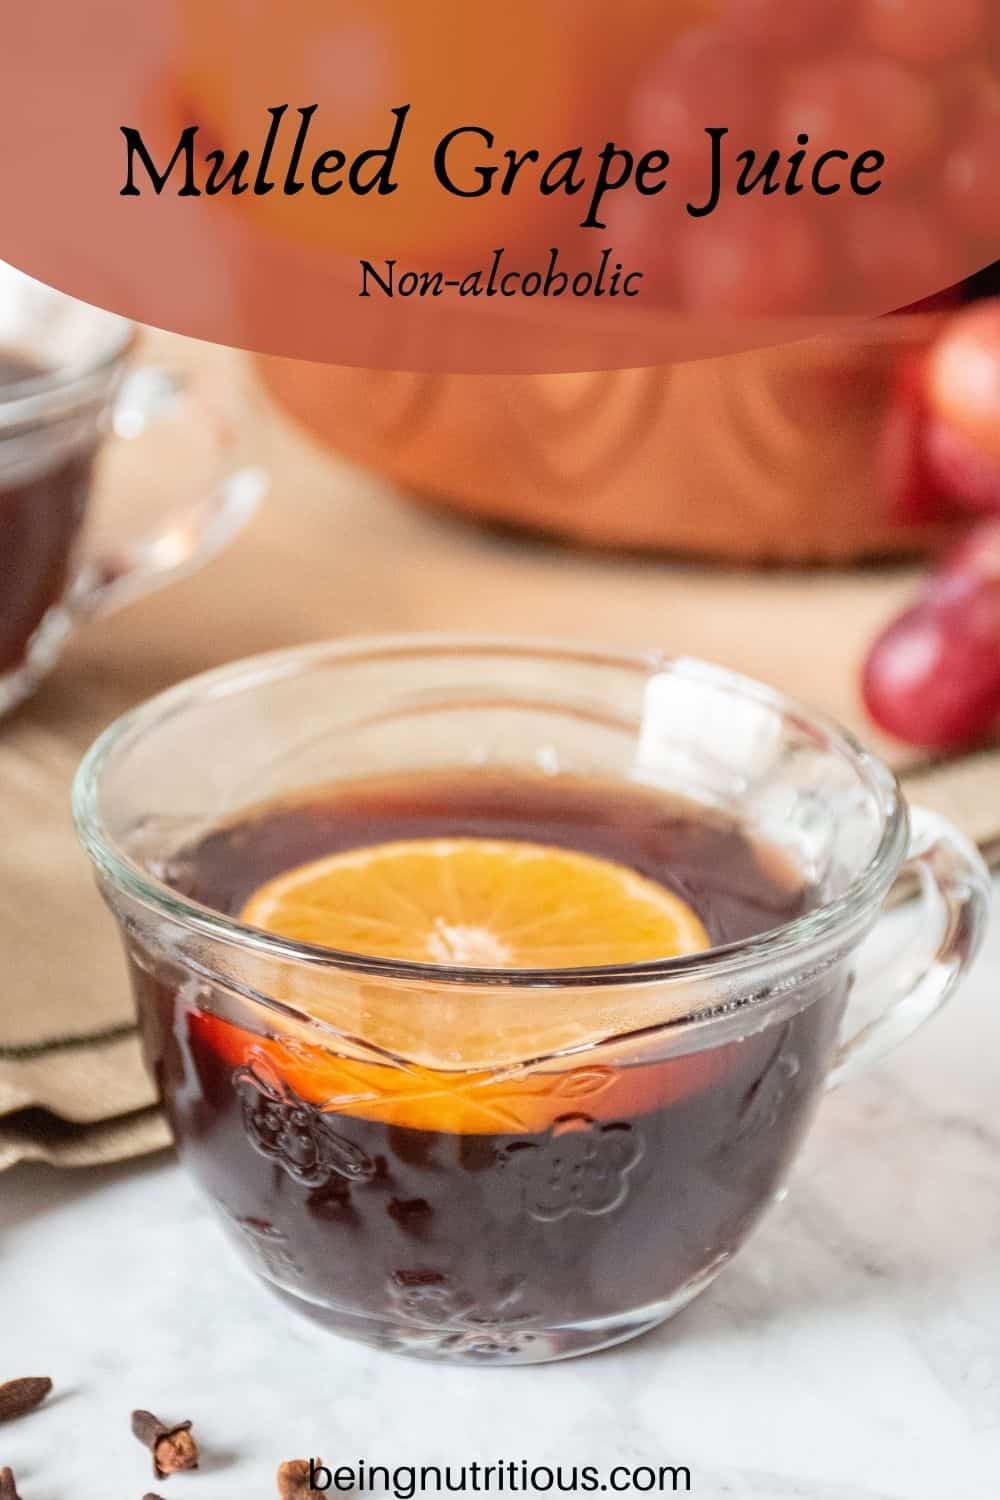 Close up of a small glass mug, filled with mulled grape juice, with an orange slice in it. Text overlay: mulled grape juice; non-alcoholic.